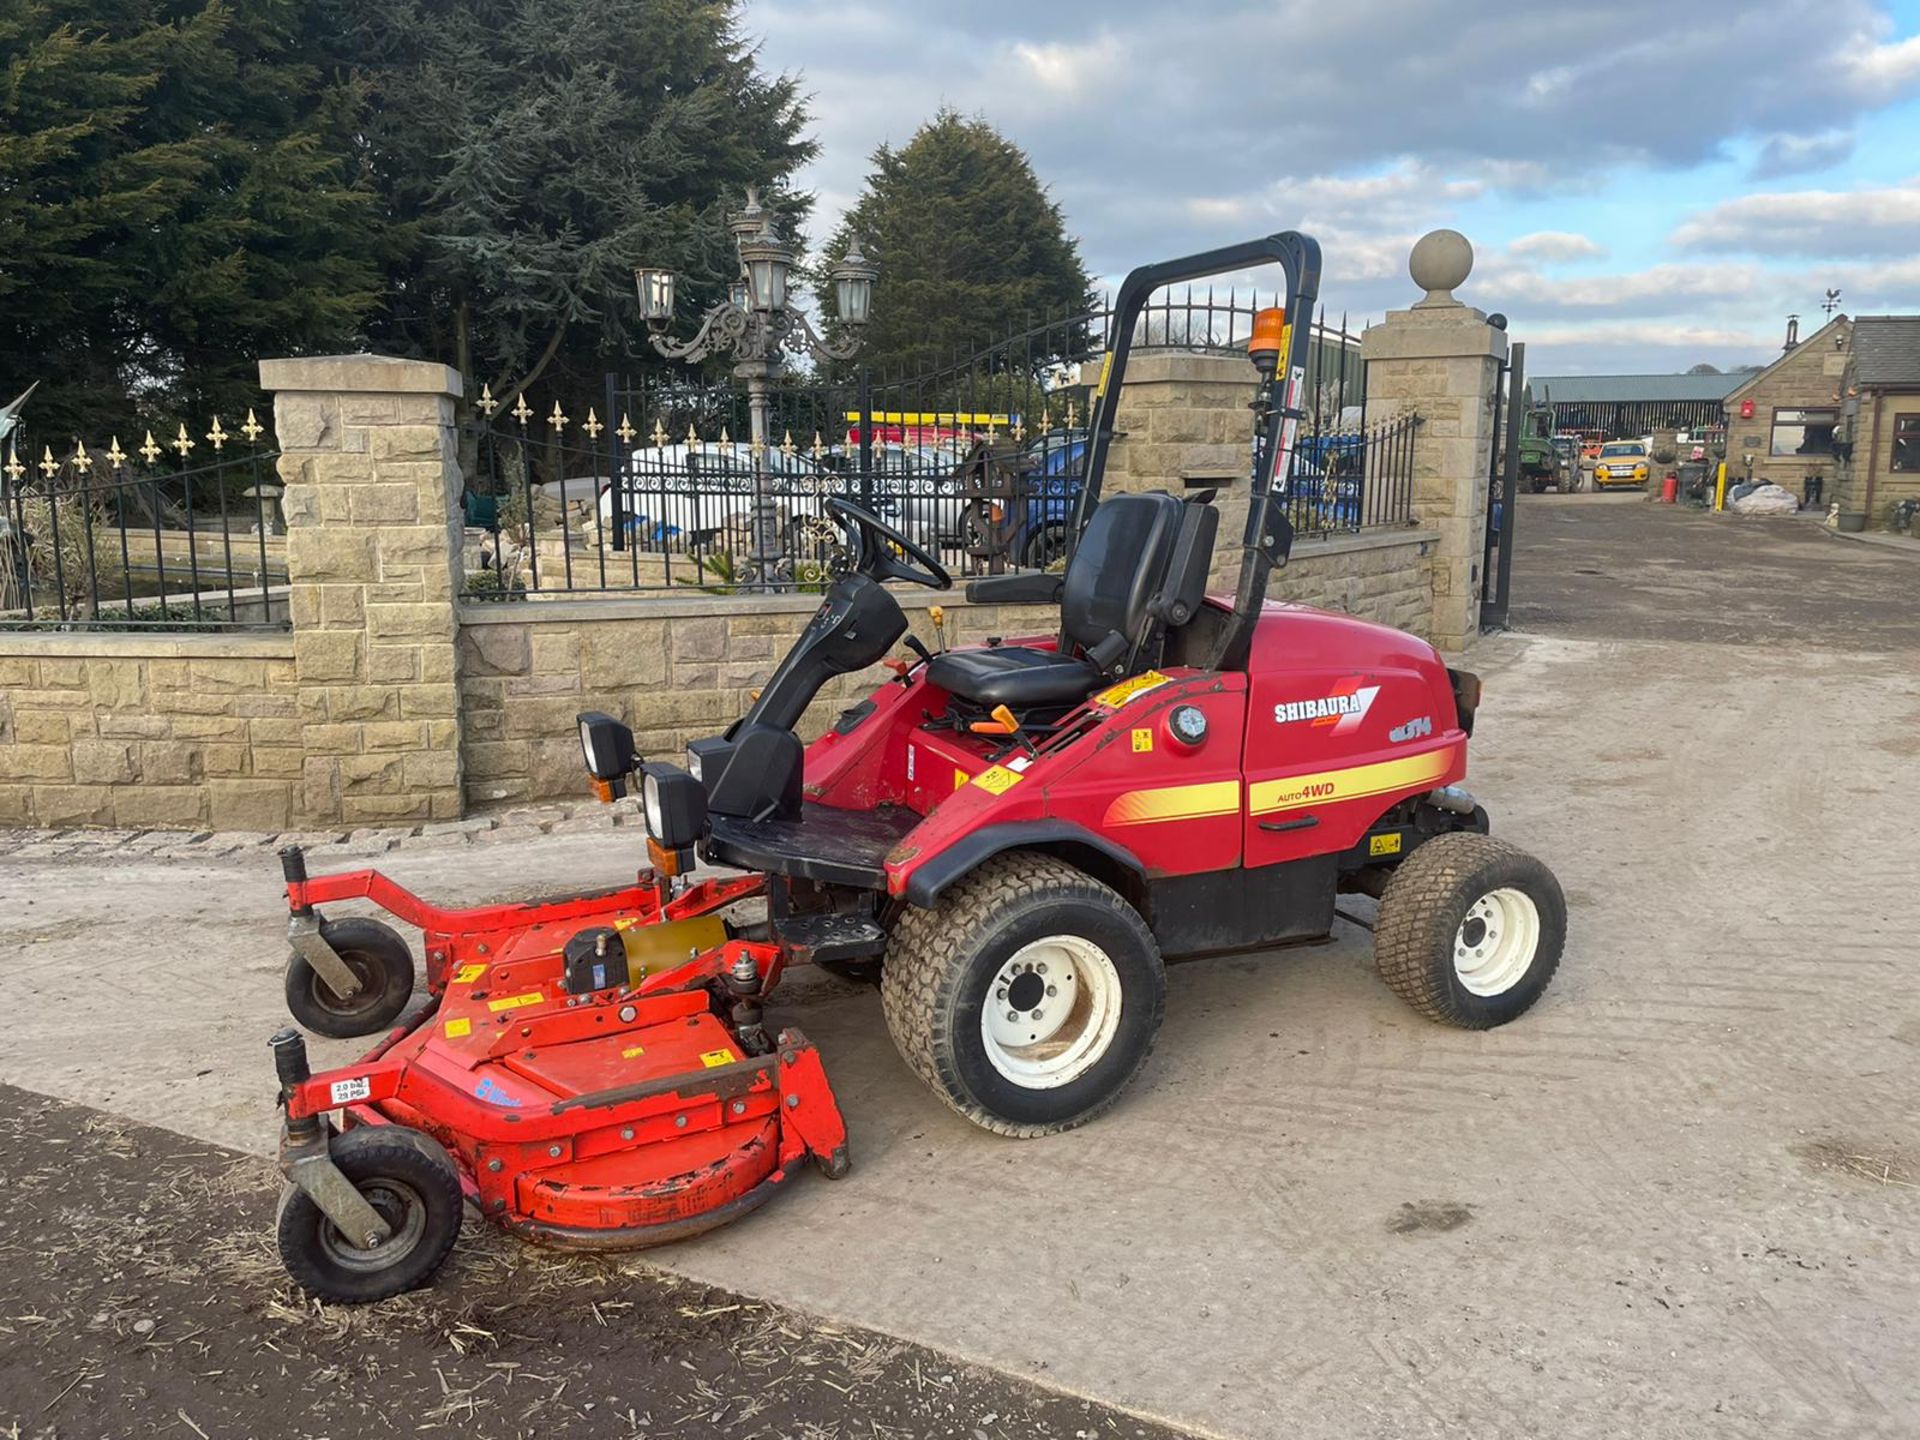 2012 SHIBAURA CM374 OUTFRONT RIDE ON MOWER, RUNS, DRIVES AND CUTS, IN USED BUT GOOD CONDITION - Image 8 of 12